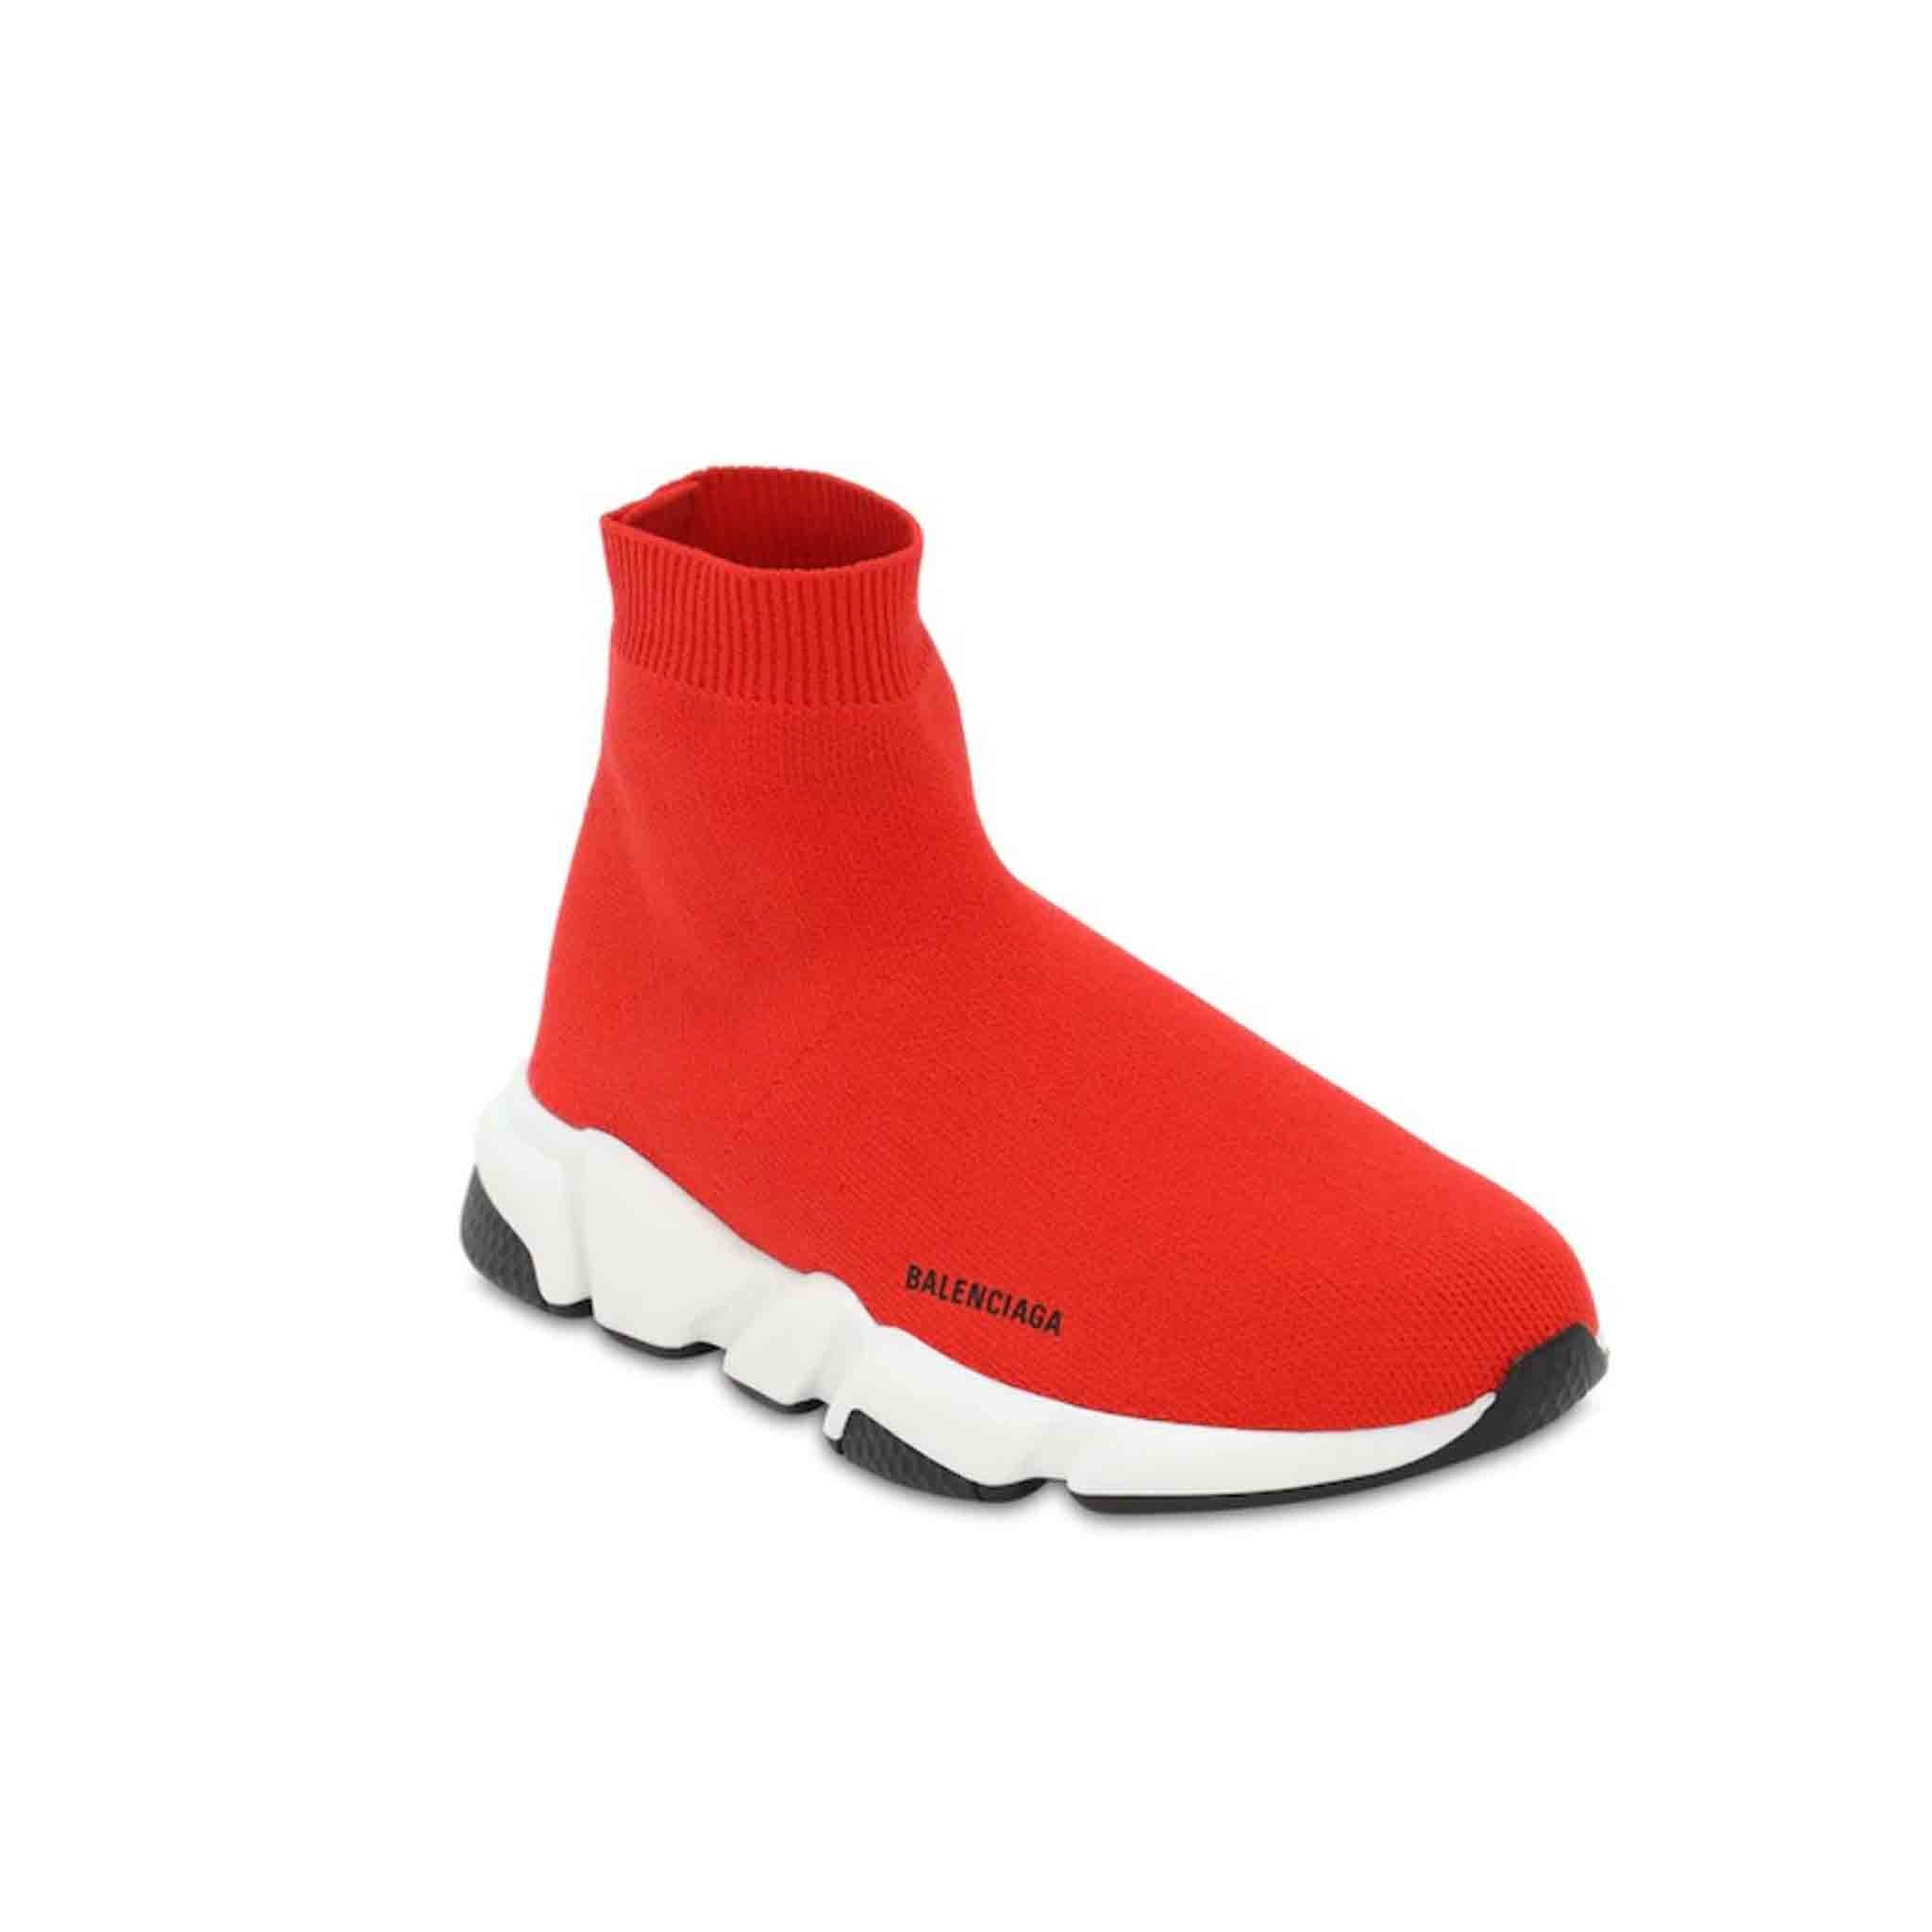 Balenciaga Red High Top Sneakers  liked on Polyvore featuring shoes  sneakers red high tops   Red high top sneakers Sneakers fashion  Sneakers fashion outfits